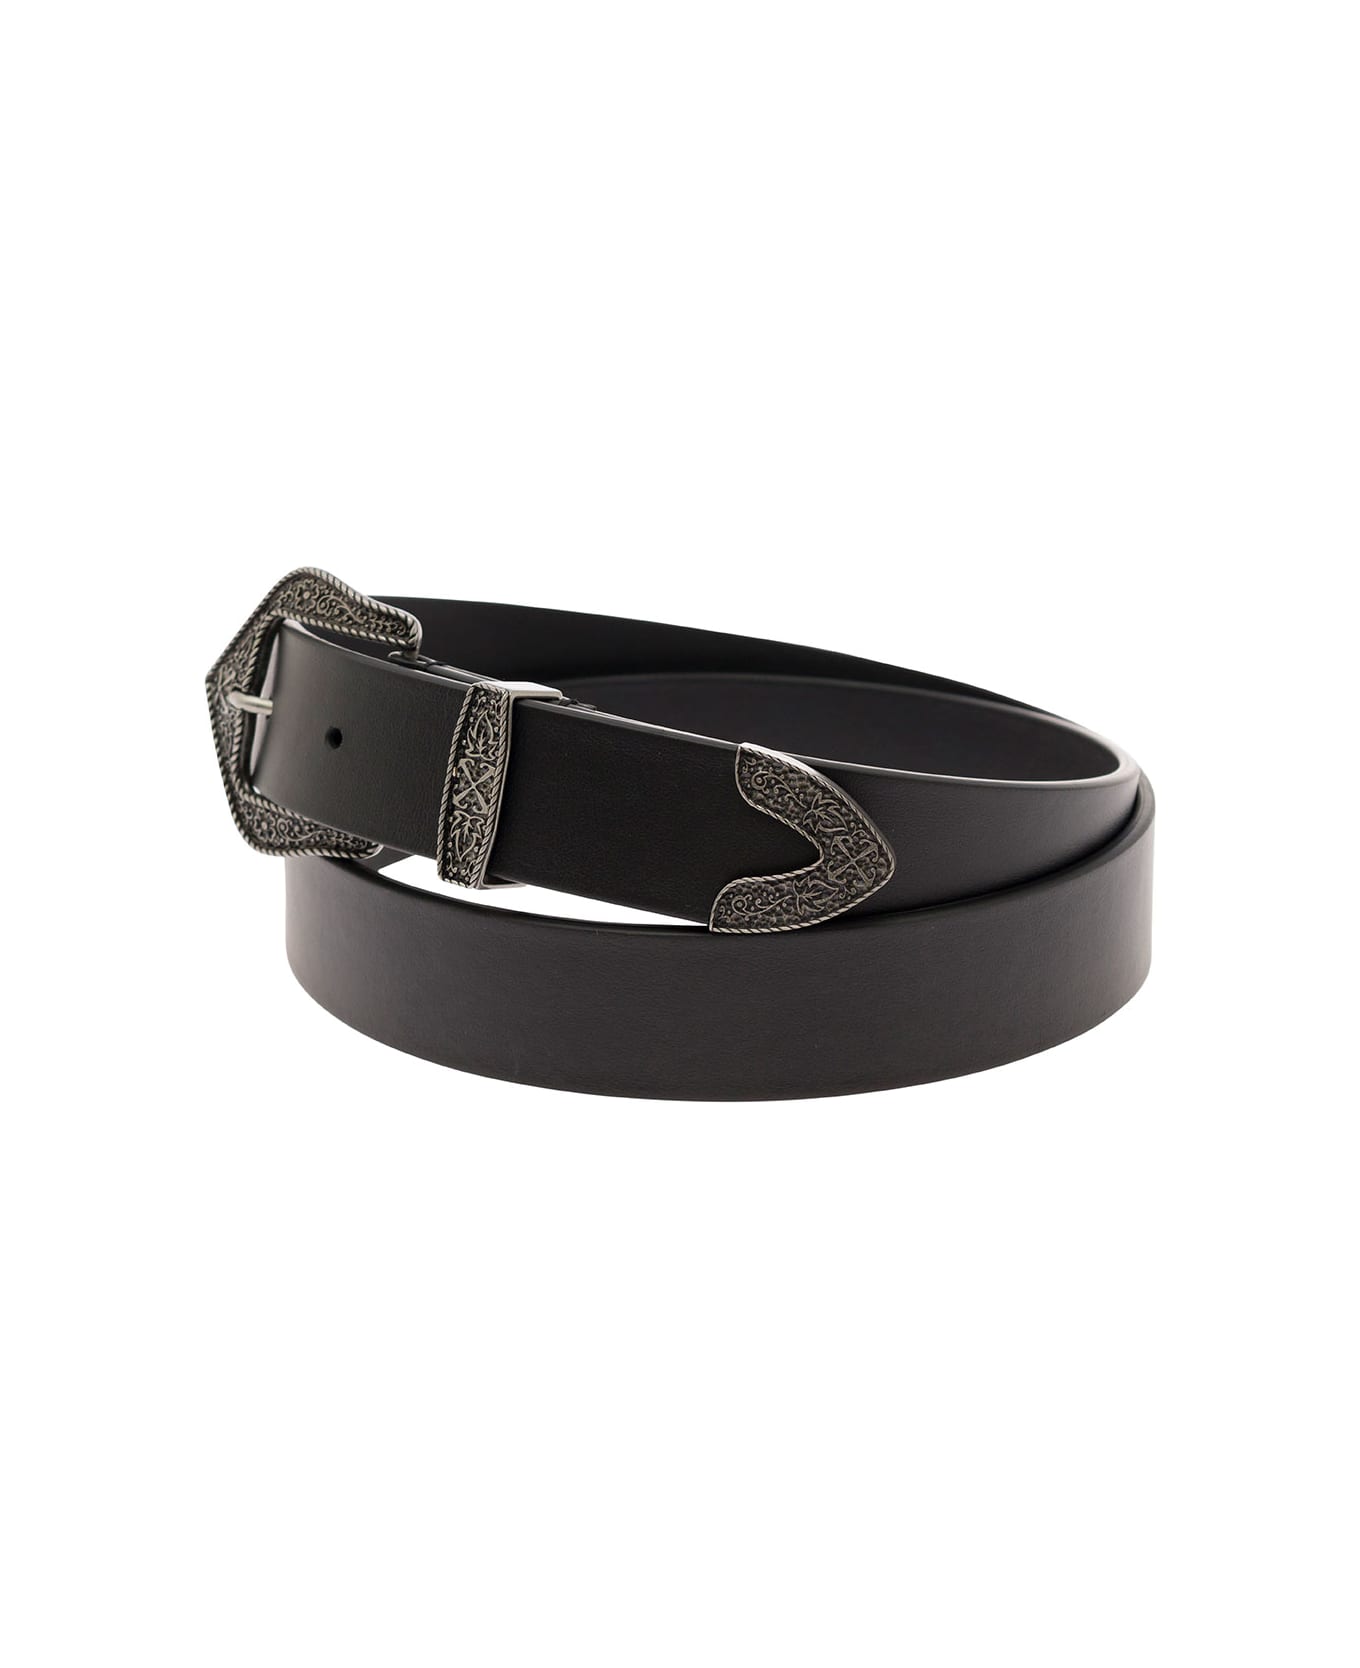 Off-White Black Belt With Western Buckle In Leather Man - Black